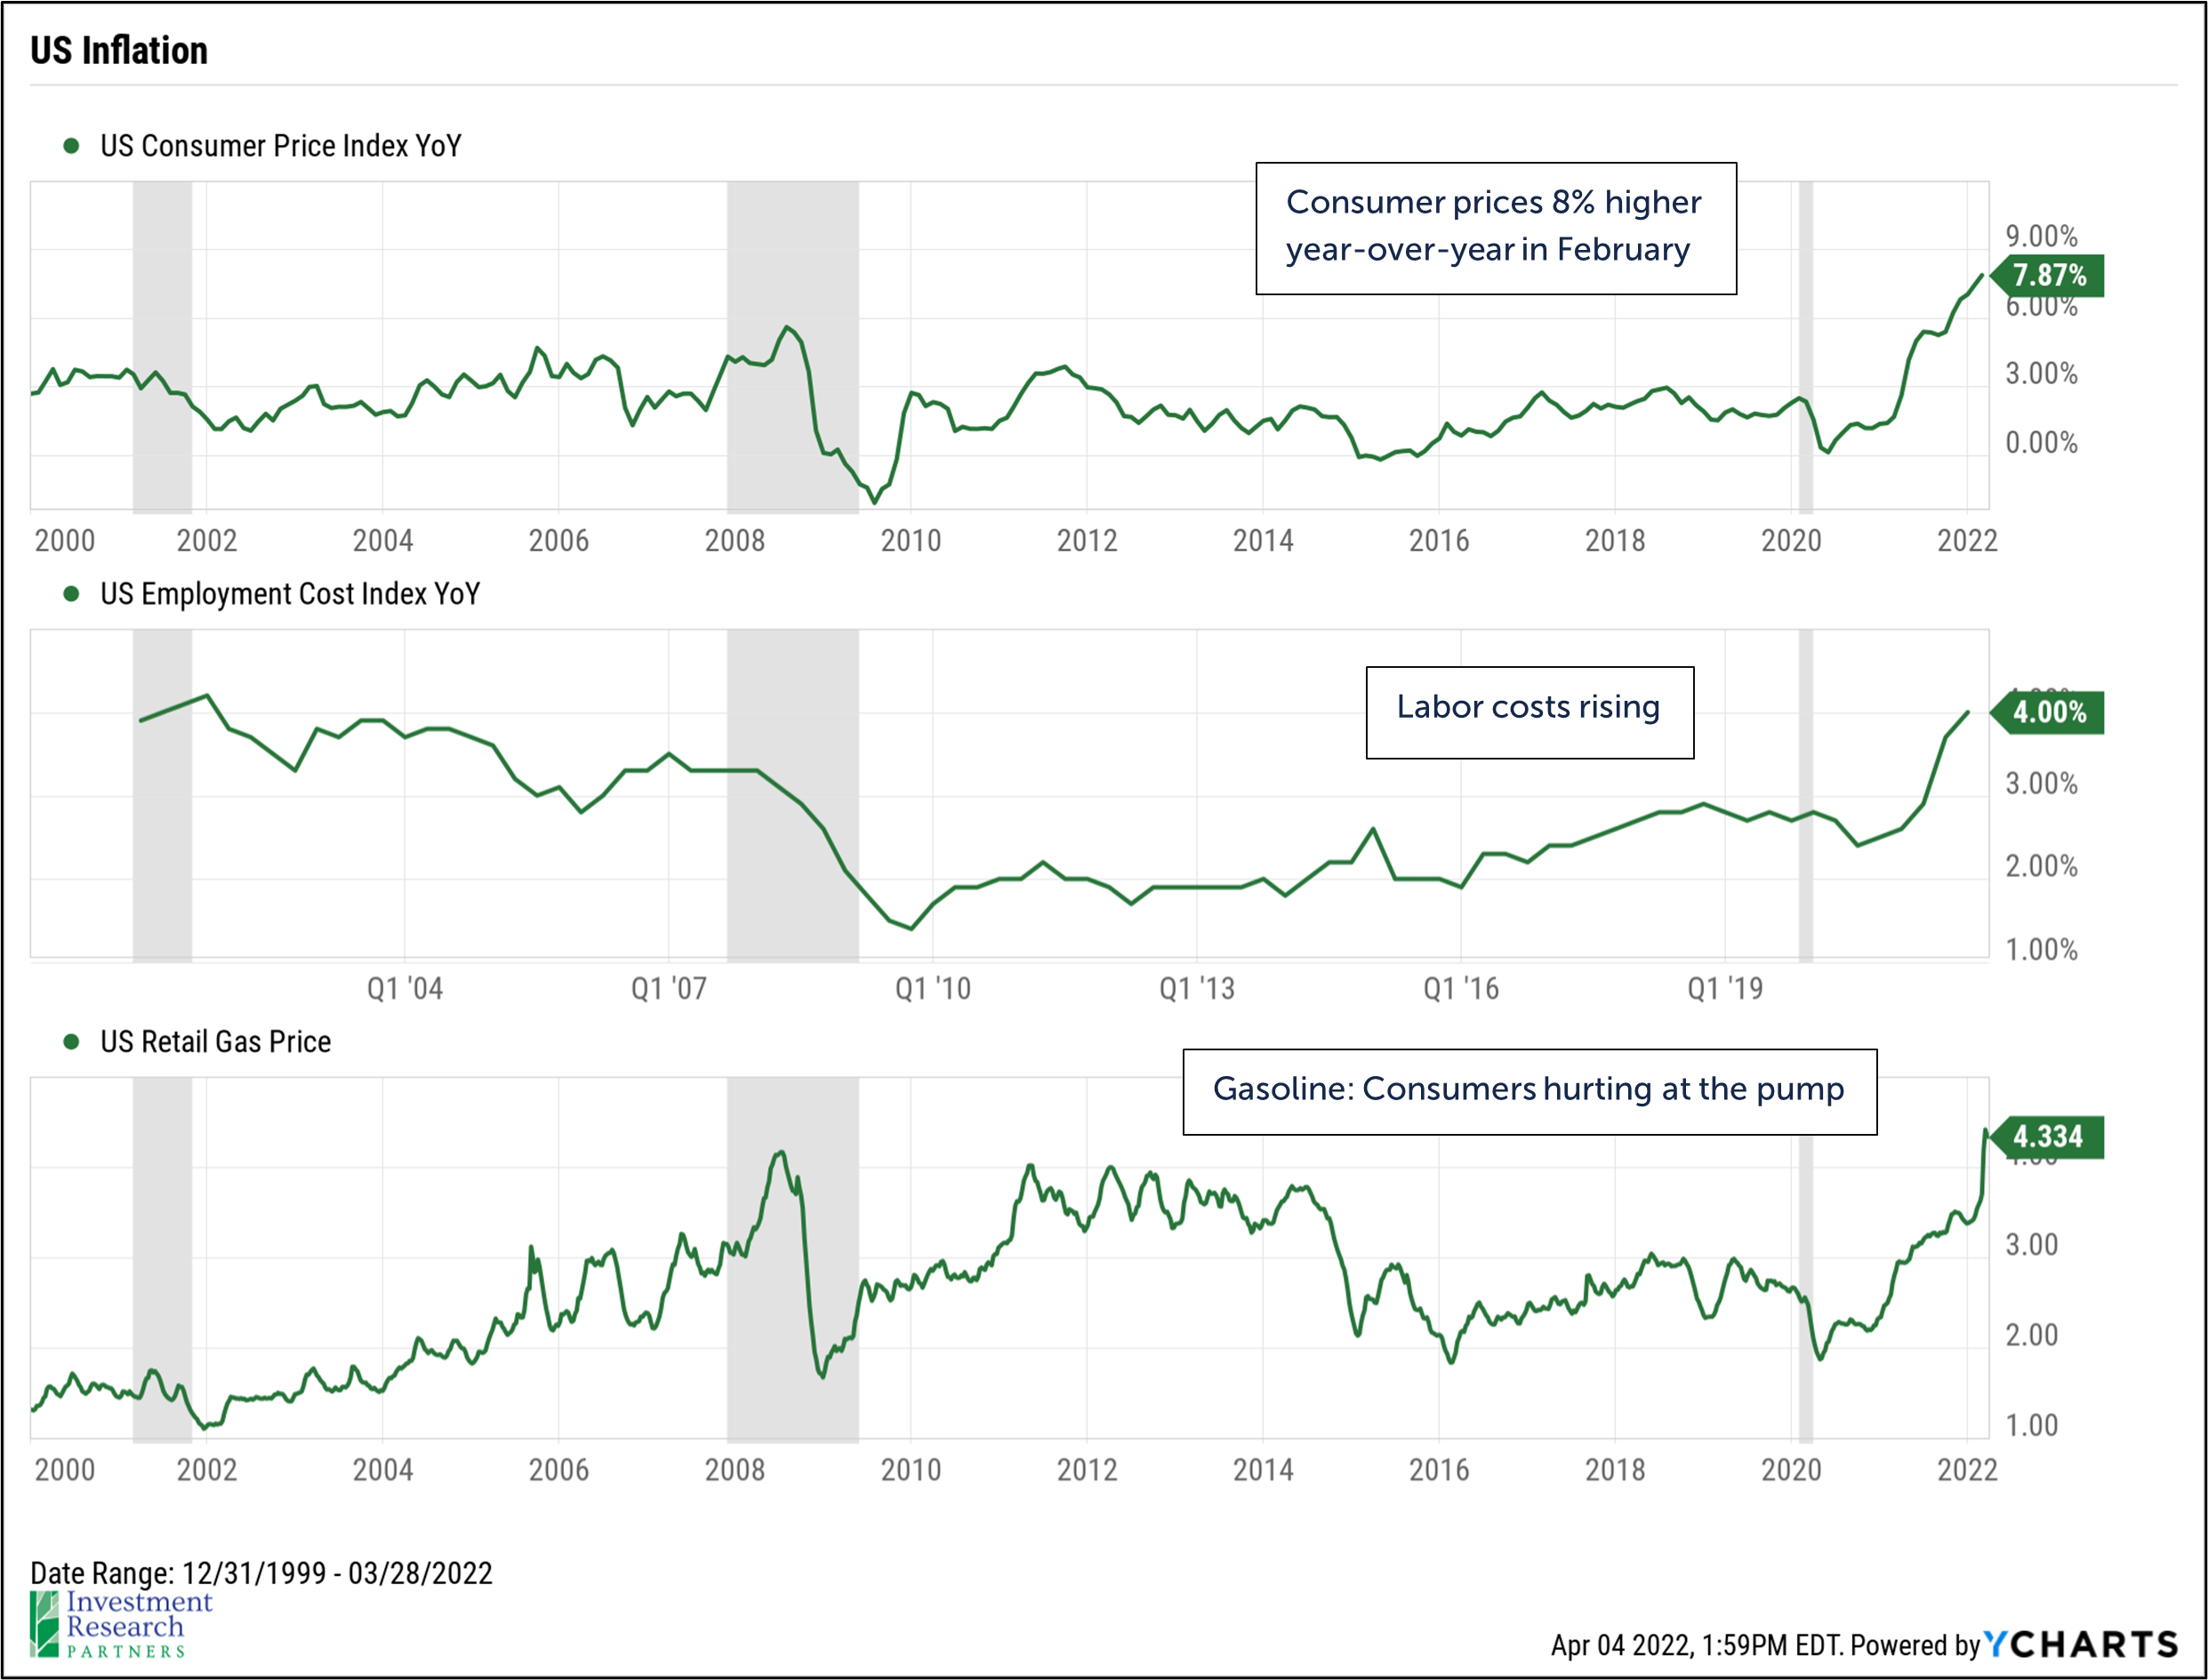 Line graphs depicting US Inflation, including US Consumer Price YoY, US Employment Cost Index YoY, and US Retail Gas Price